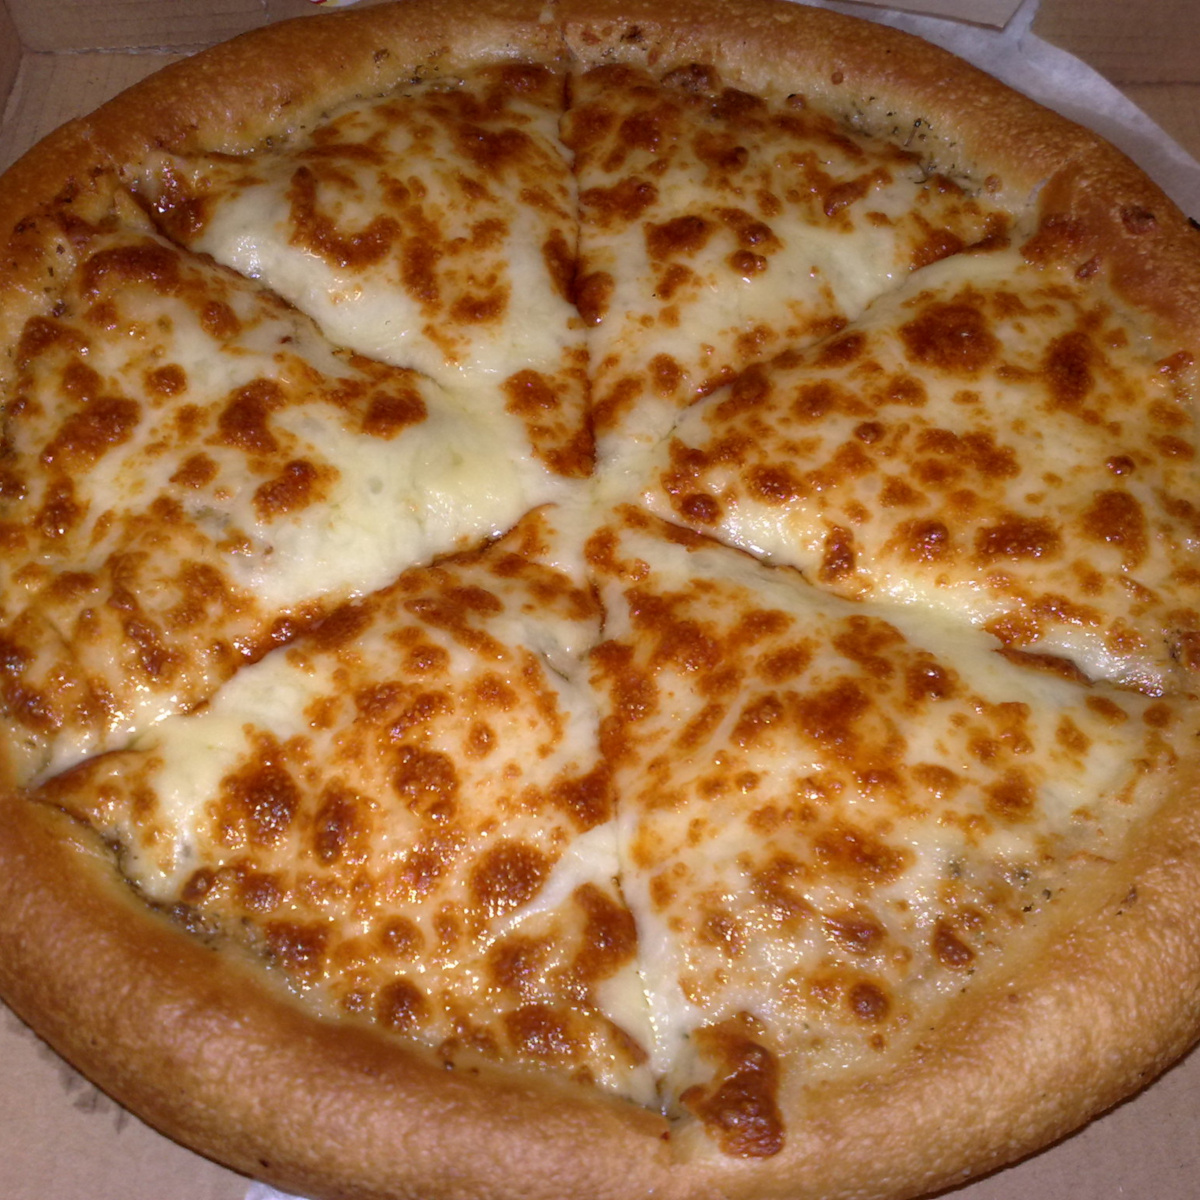 Garlic pizza with cheese